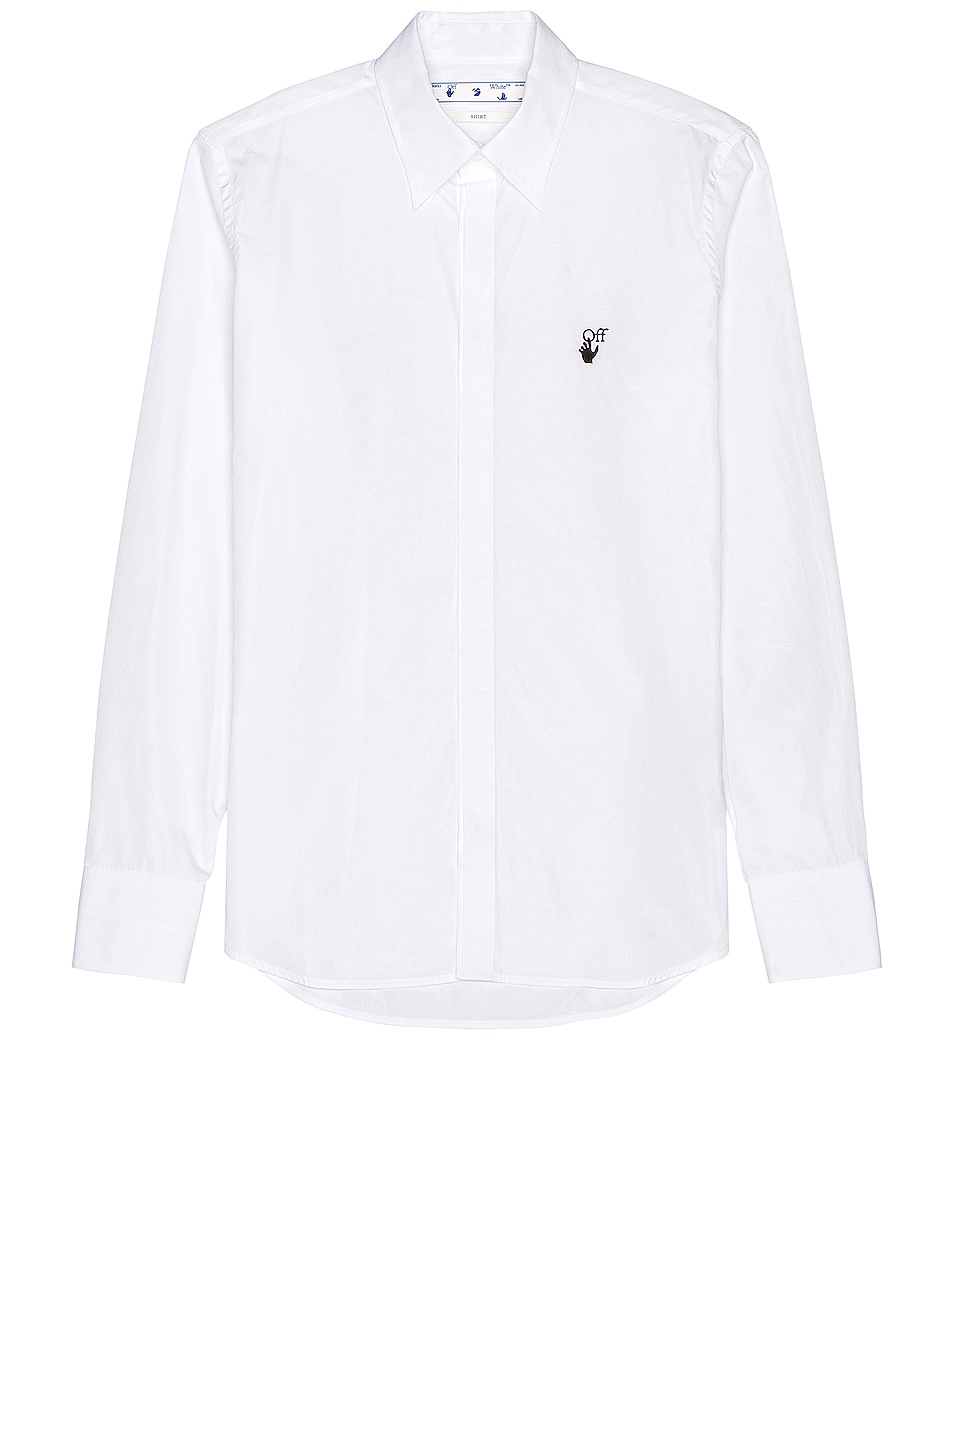 Image 1 of OFF-WHITE Hand Off Classic Shirt in White